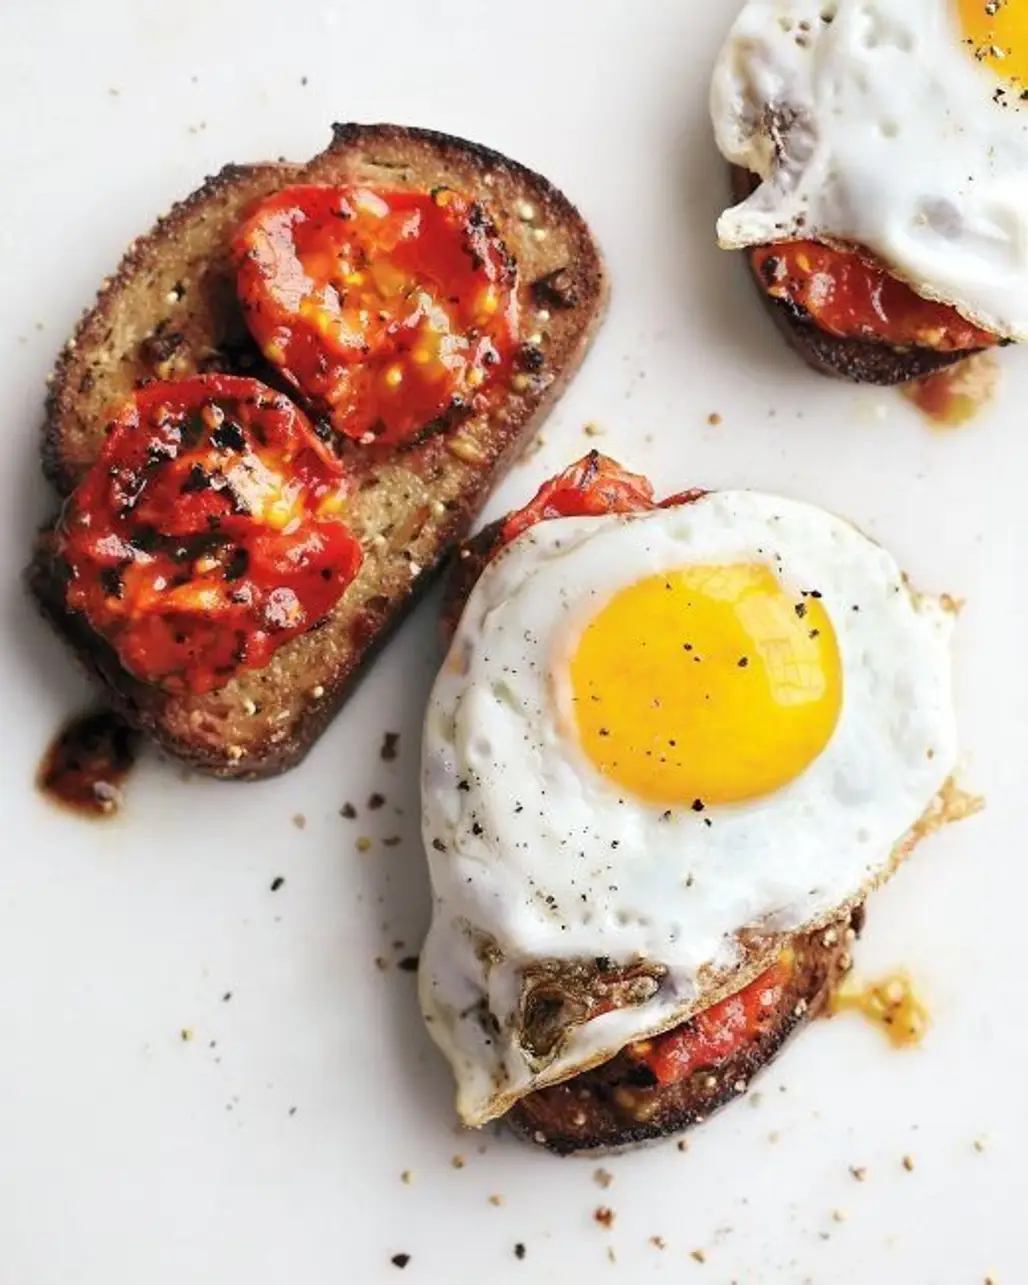 Charred Tomatoes with Fried Egg on Garlic Toast